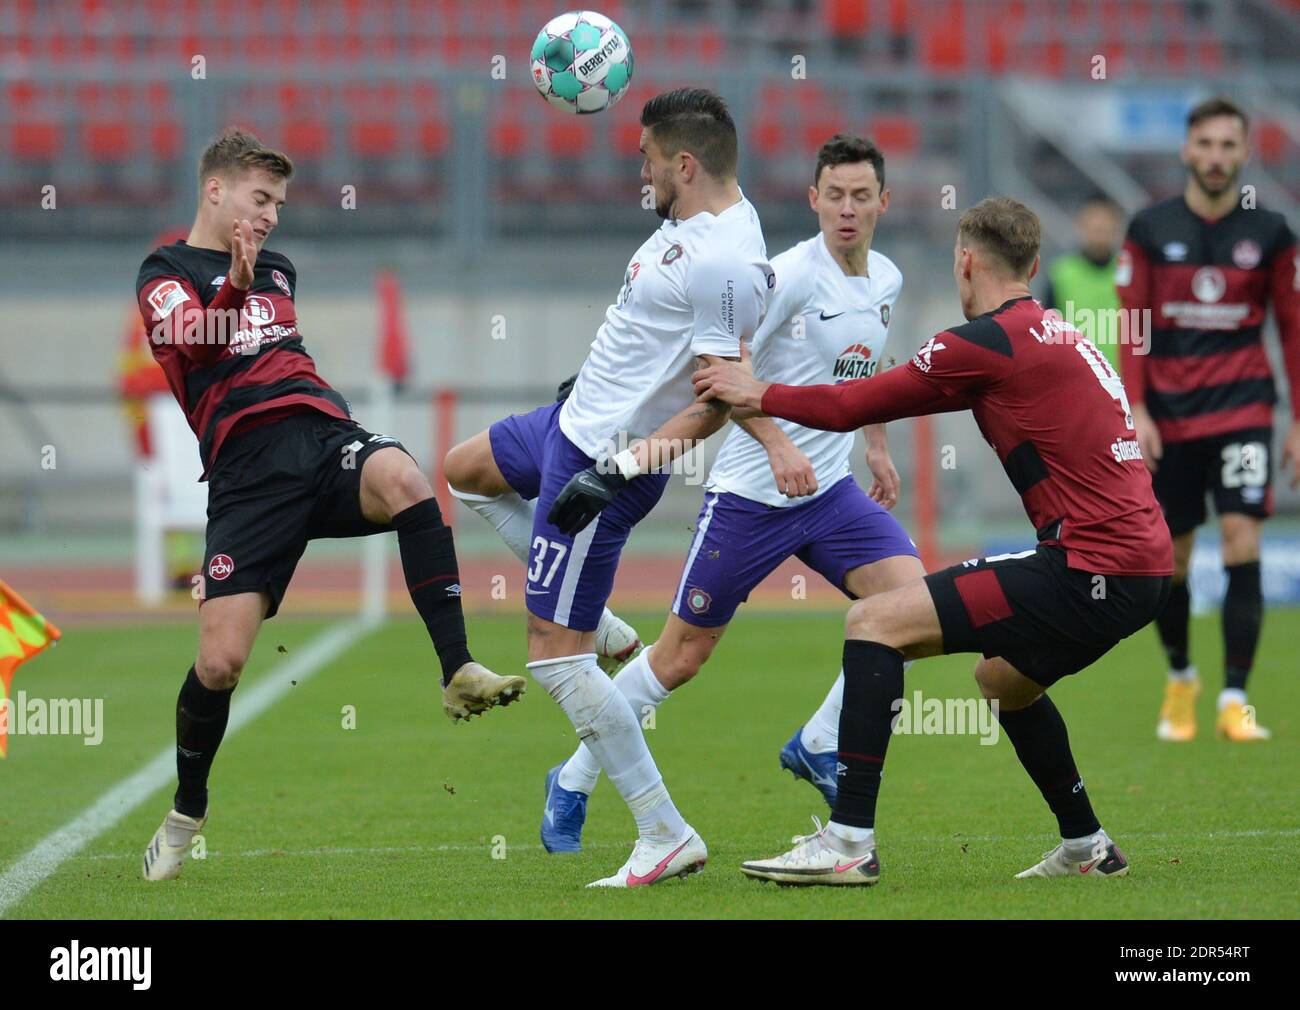 Nuremberg, Germany. 20th Dec, 2020. Soccer: 2. Bundesliga, 1. FC Nürnberg - Erzgebirge Aue, Matchday 13, Max-Morlock-Stadion Nuremberg: Pascal Testroet (M) from Aue plays against Fabian Nürnberger (l) and Asger Sörensen (r) from Nuremberg. Credit: Timm Schamberger/dpa - IMPORTANT NOTE: In accordance with the regulations of the DFL Deutsche Fußball Liga and/or the DFB Deutscher Fußball-Bund, it is prohibited to use or have used photographs taken in the stadium and/or of the match in the form of sequence pictures and/or video-like photo series./dpa/Alamy Live News Stock Photo